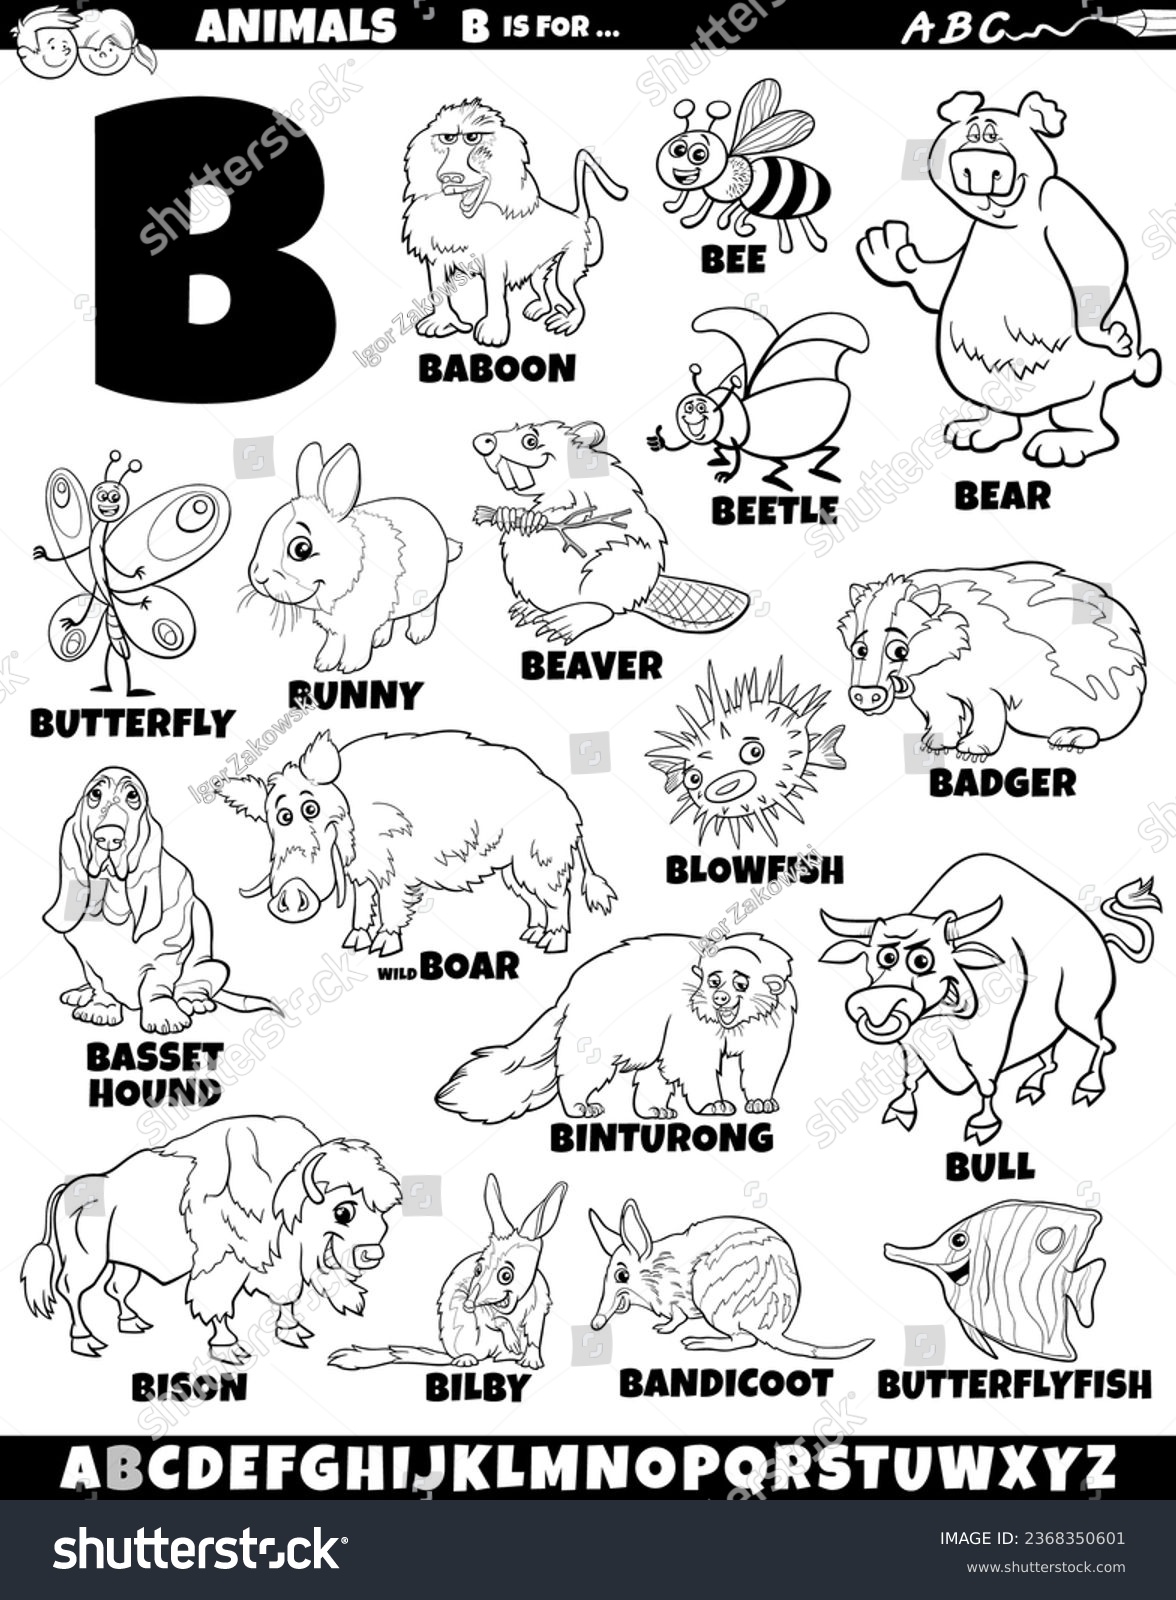 SVG of Cartoon illustration of animal characters set for letter B coloring page svg